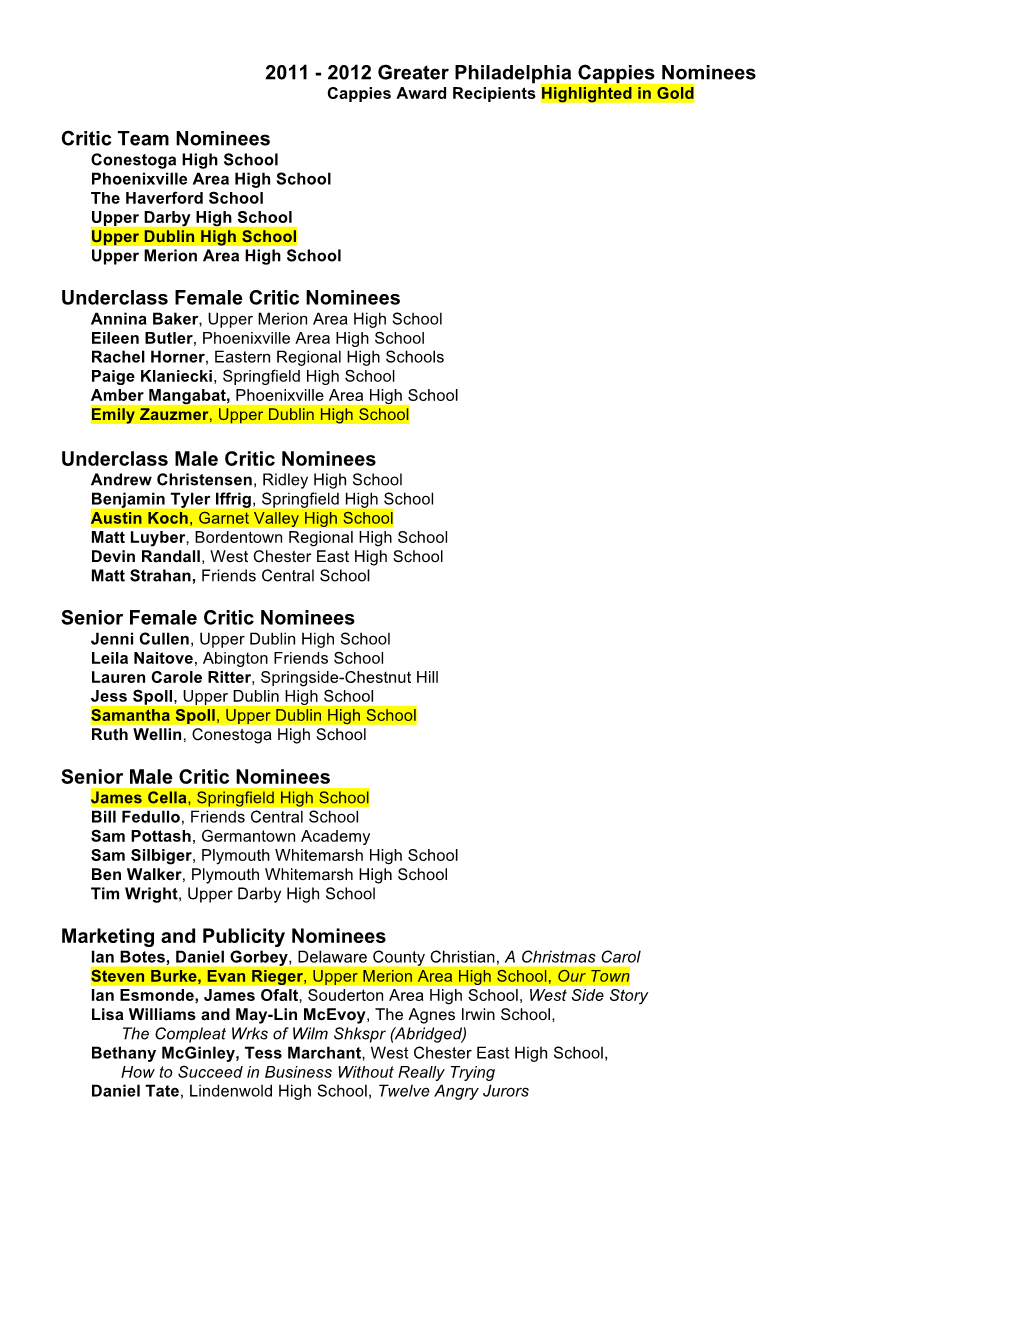 2011 - 2012 Greater Philadelphia Cappies Nominees Cappies Award Recipients Highlighted in Gold